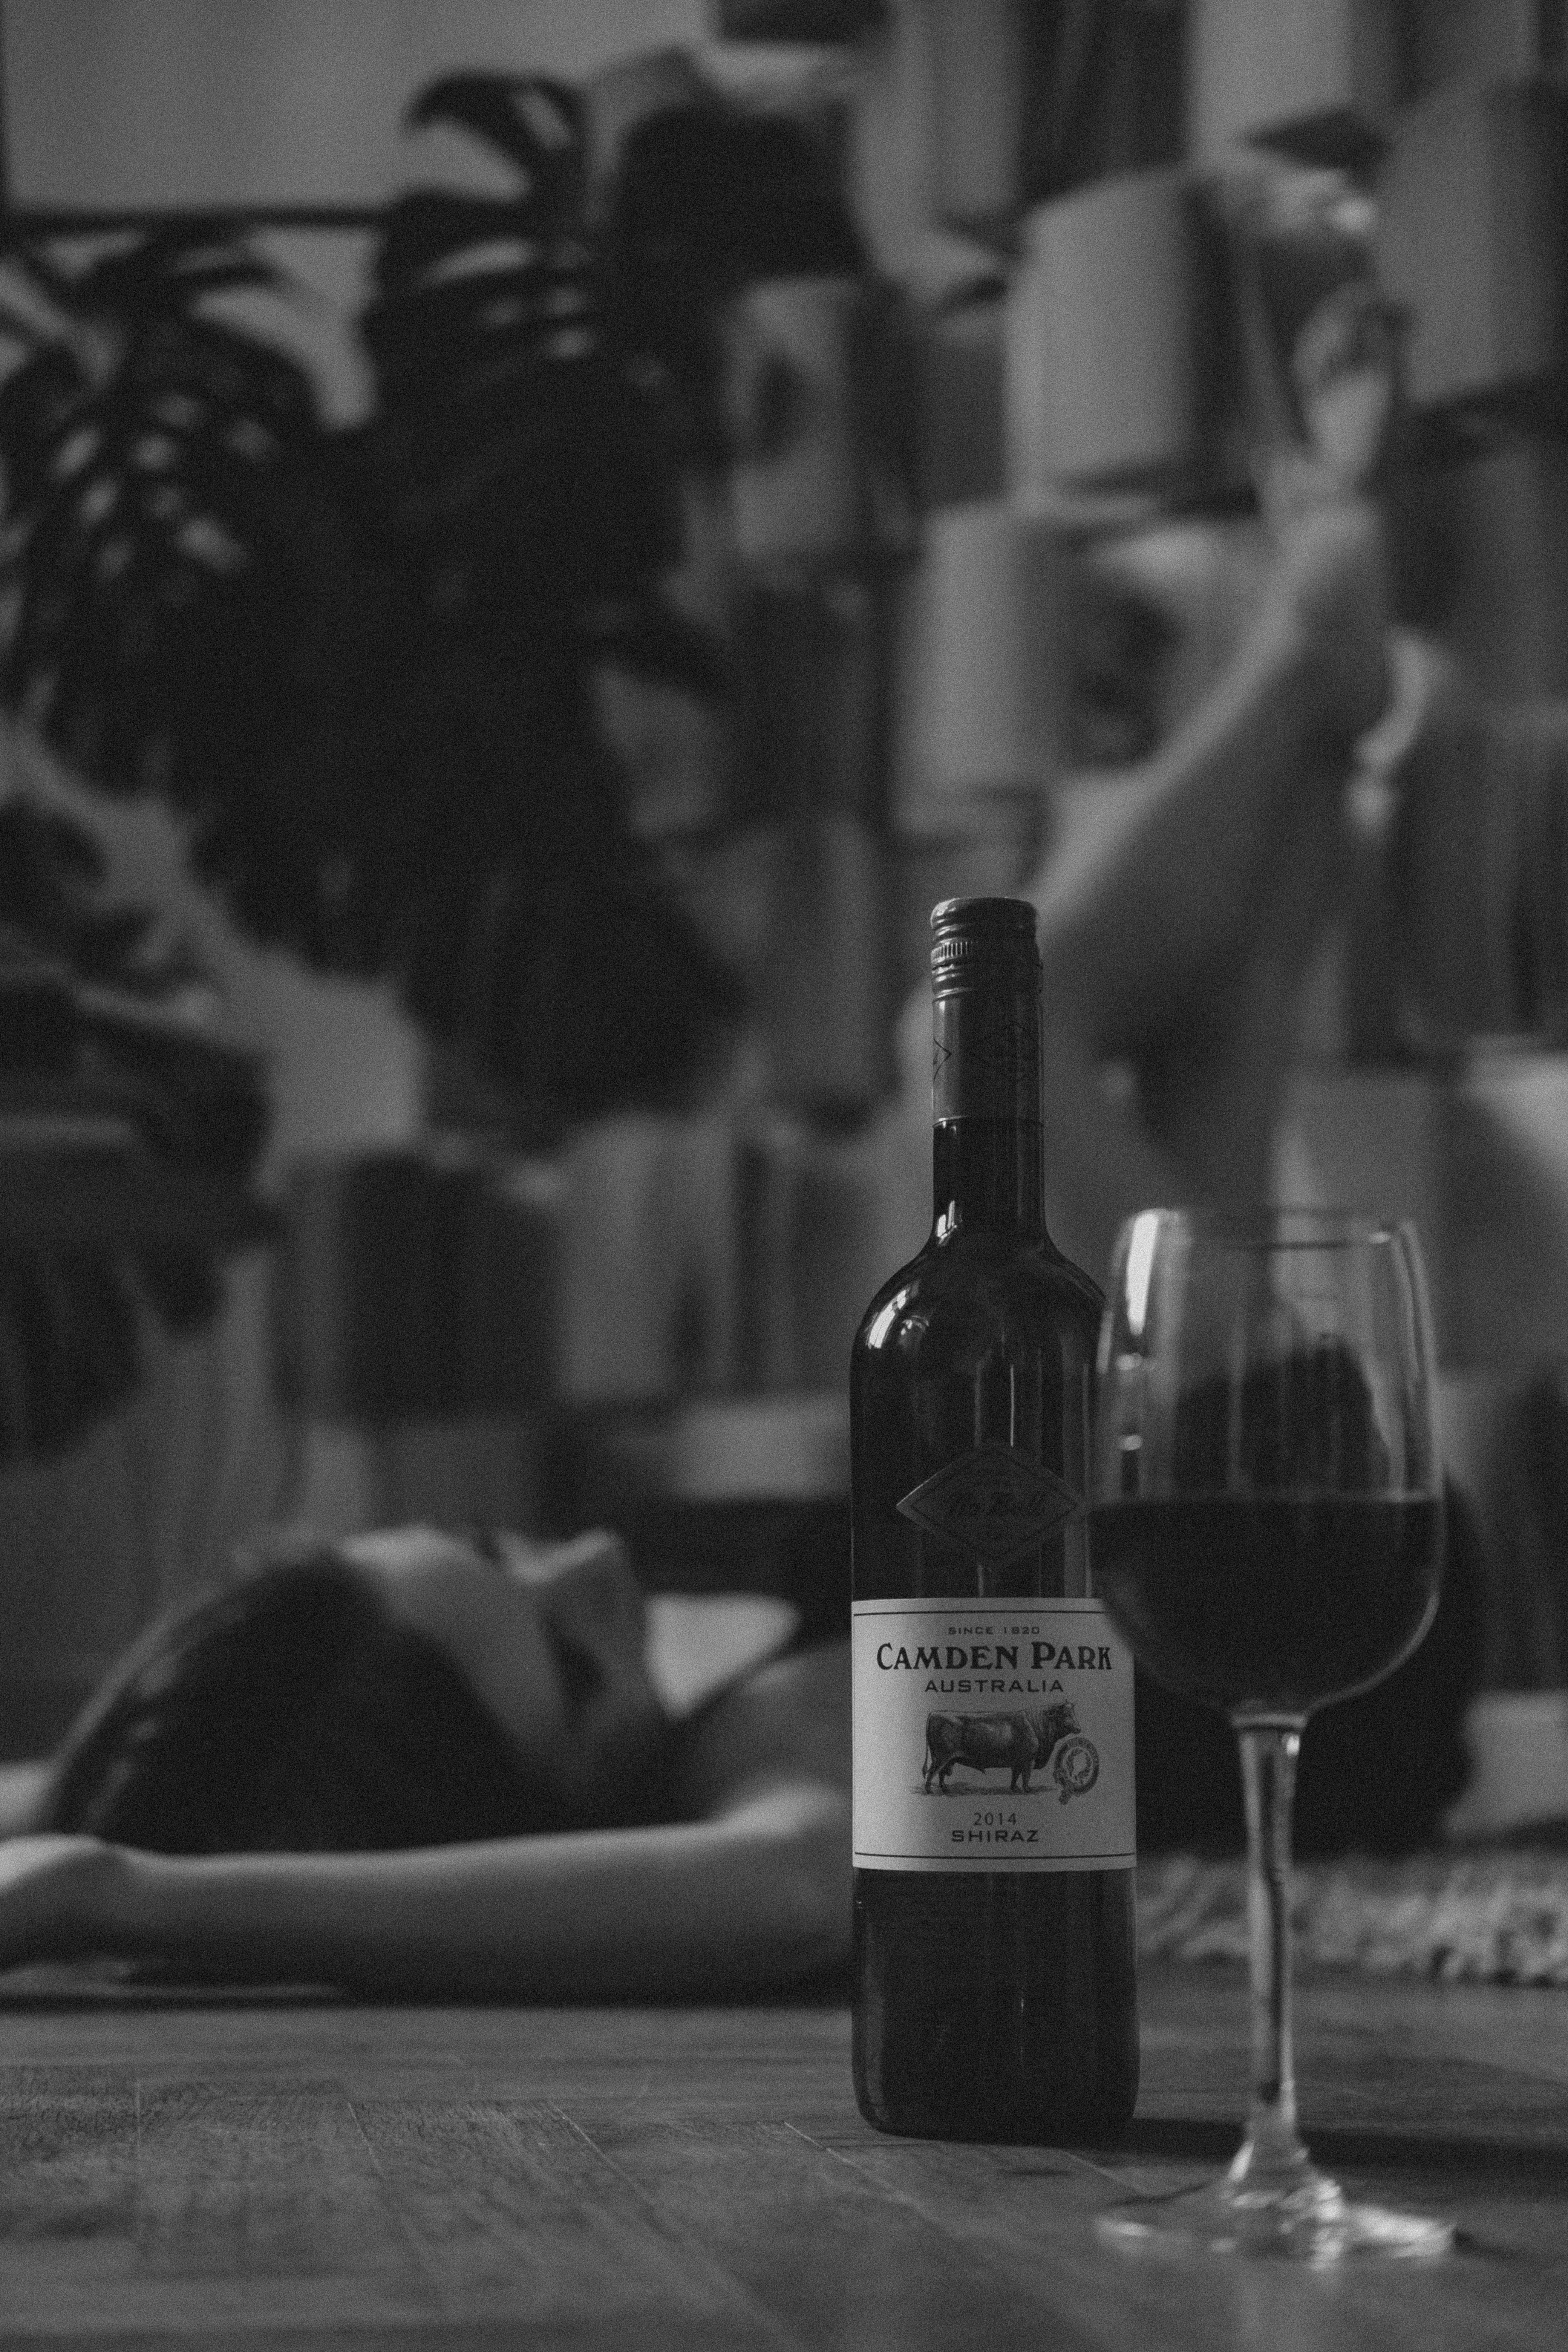 grayscale photo of wine bottle and wine glass